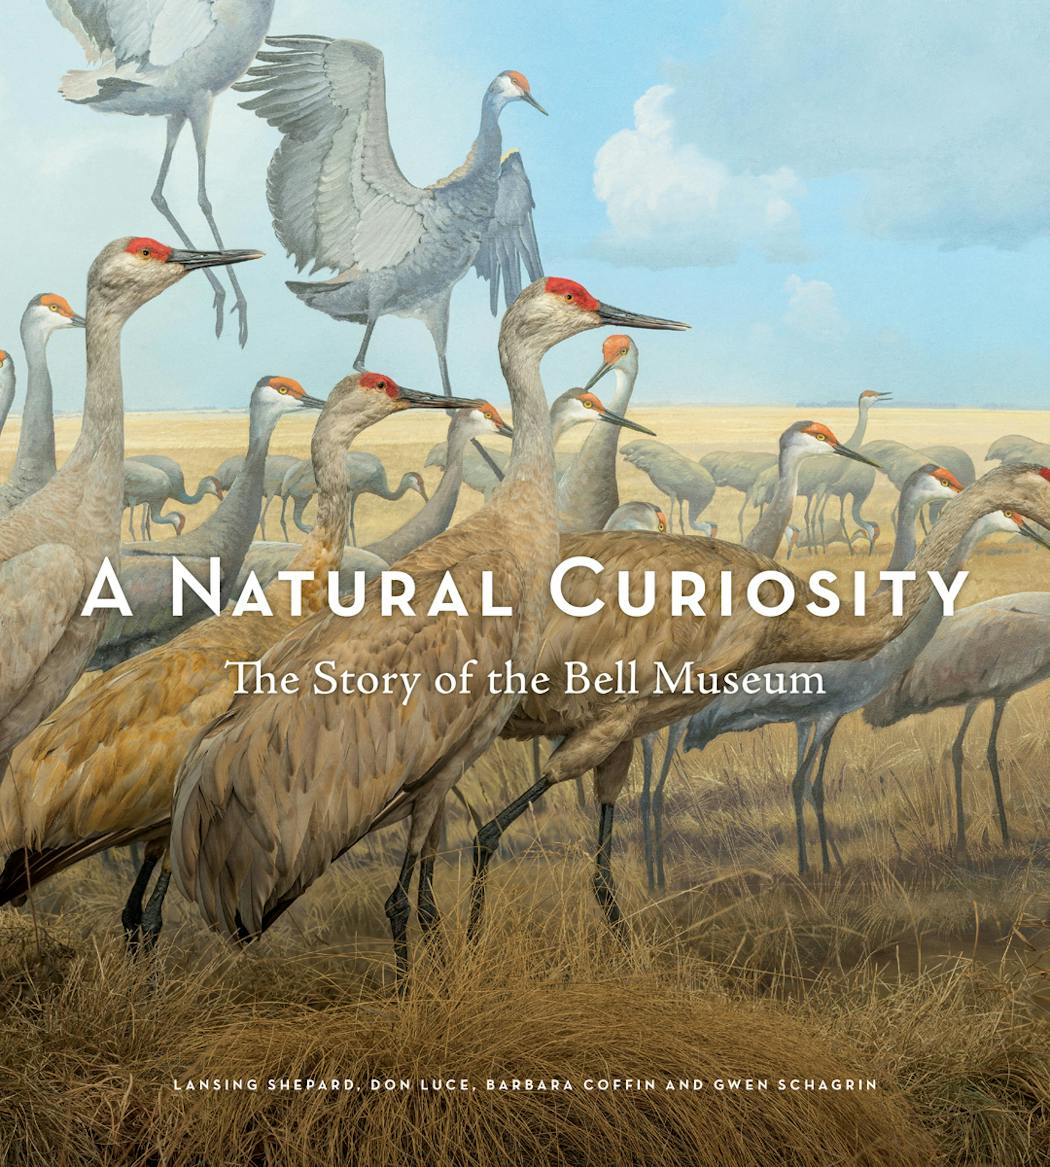 The new book’s cover speaks to the Bell Museum’s history. It shows a diorama of sandhill cranes completed in 1946. “A Natural Curiosity: The Story of the Bell Museum”